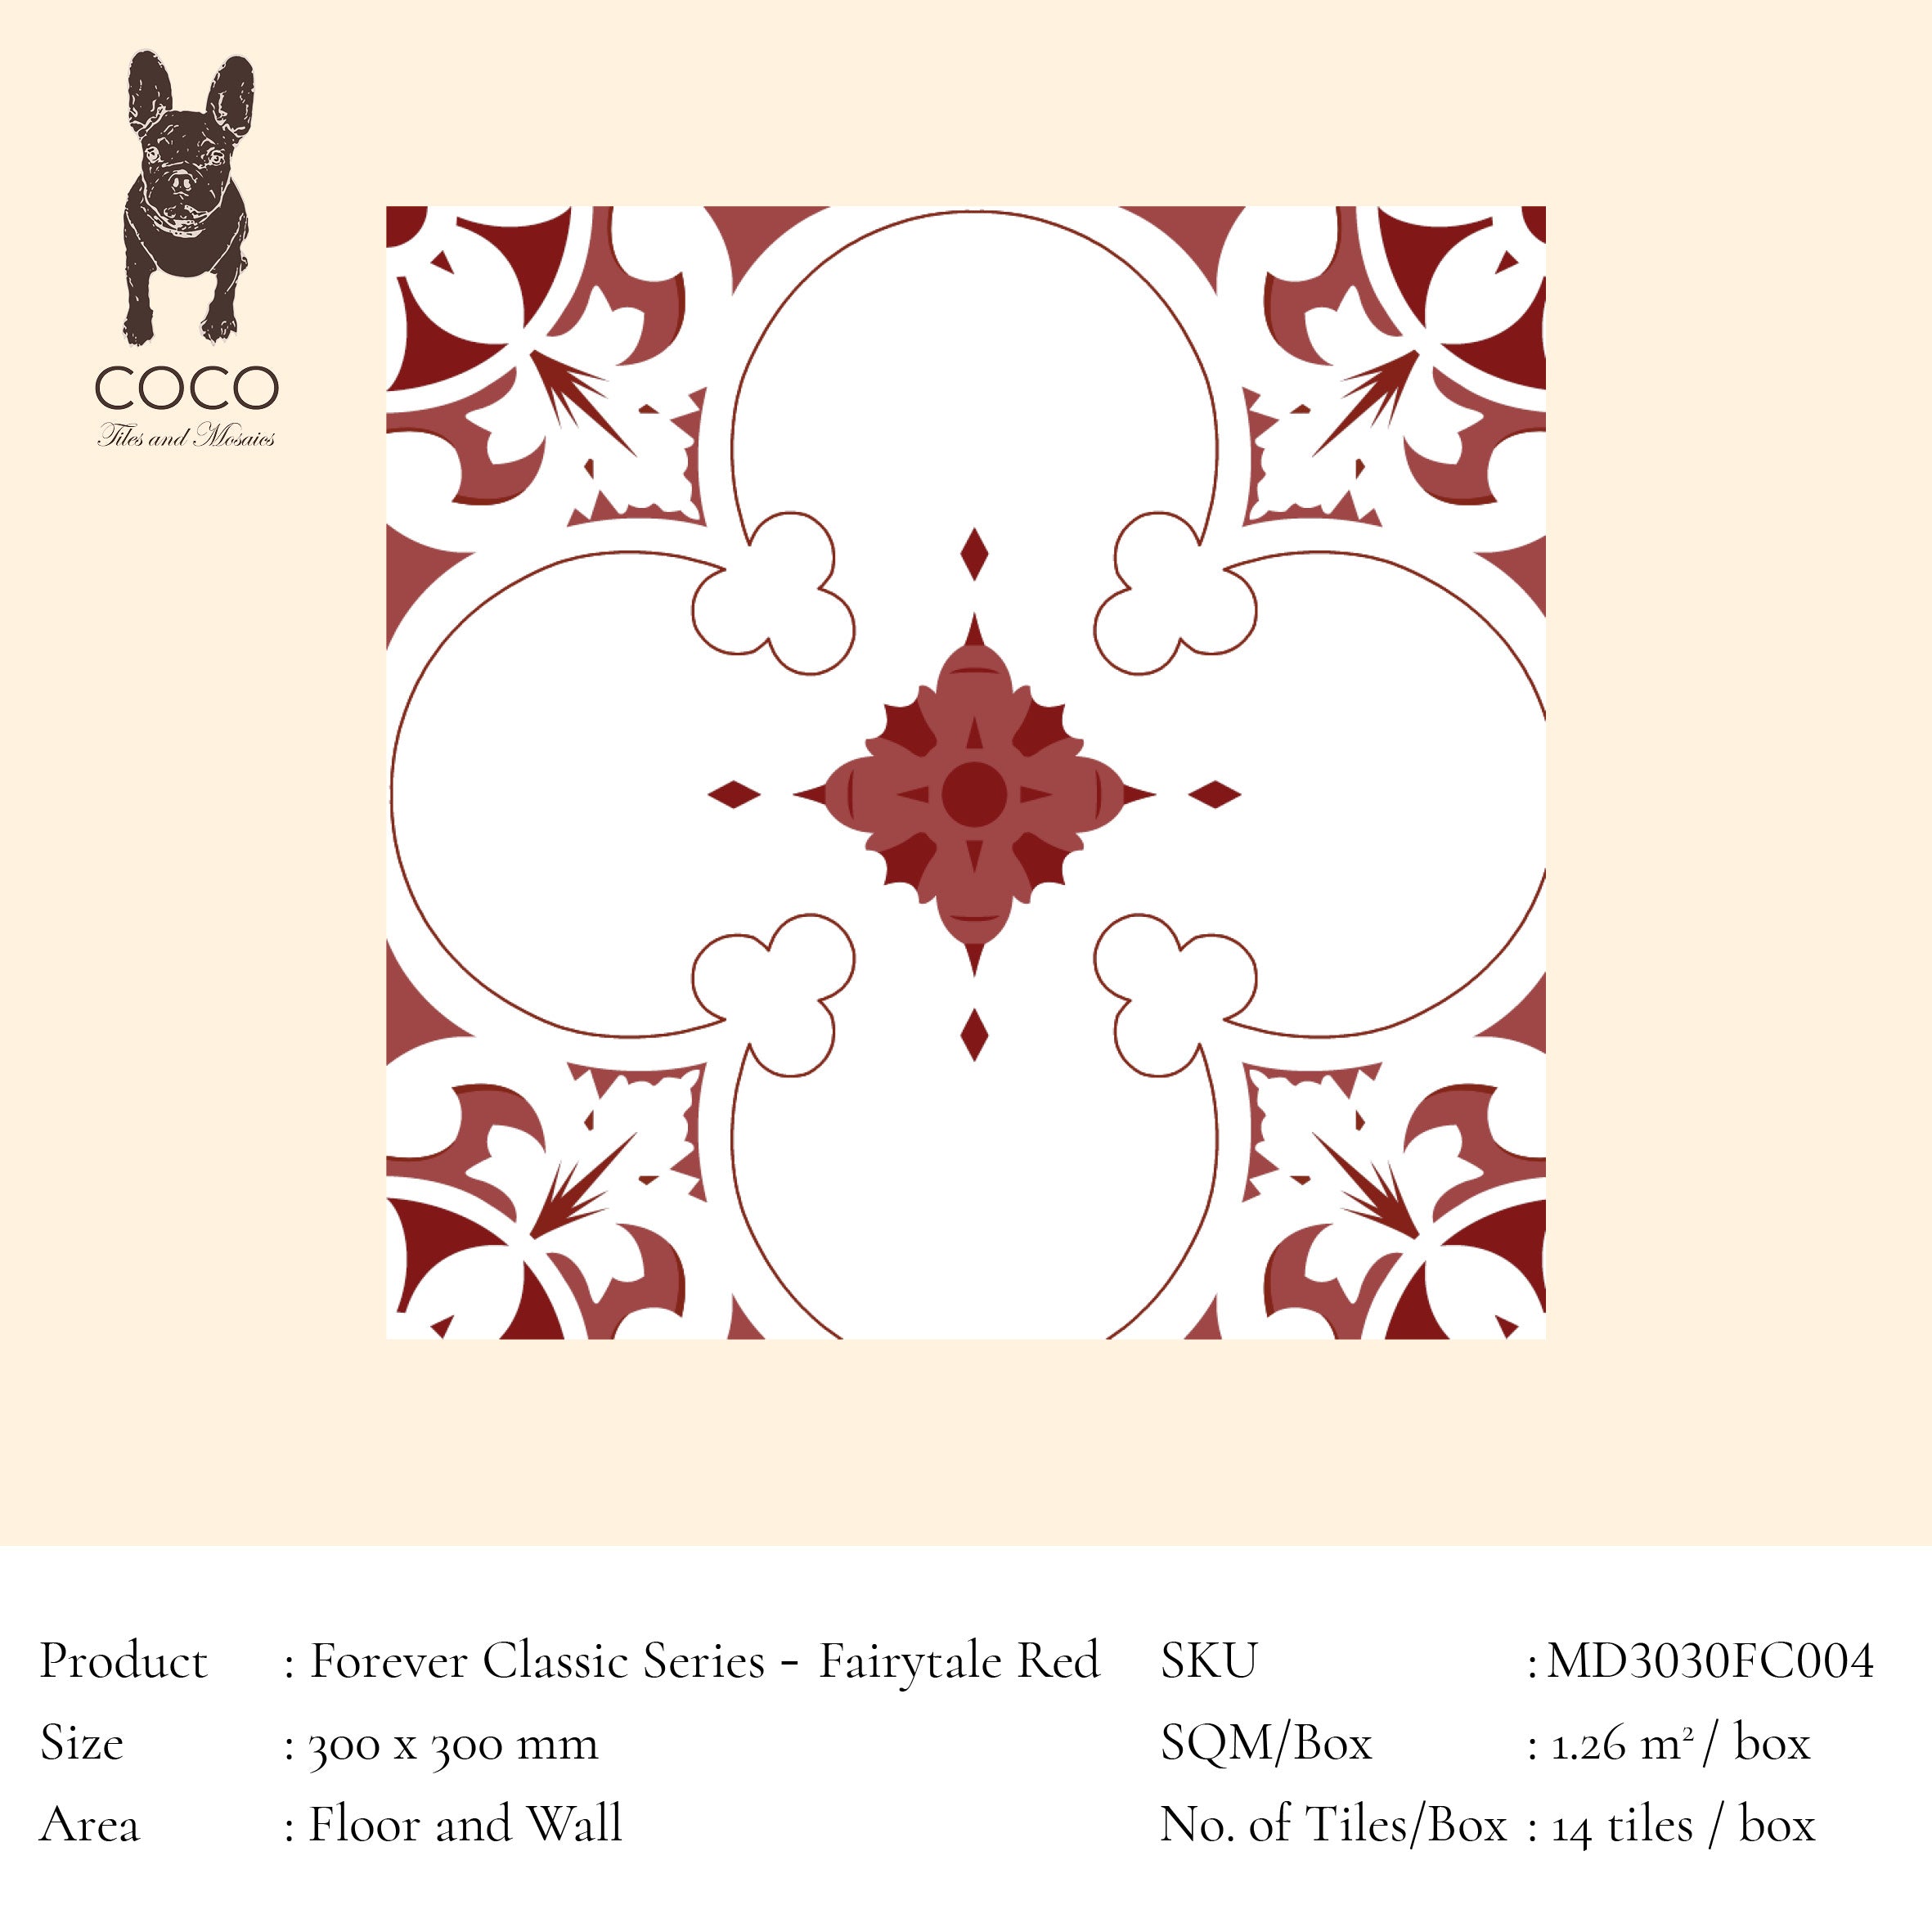 Forever Classic Series - Fairytale Red 300x300mm Ceramic Tile